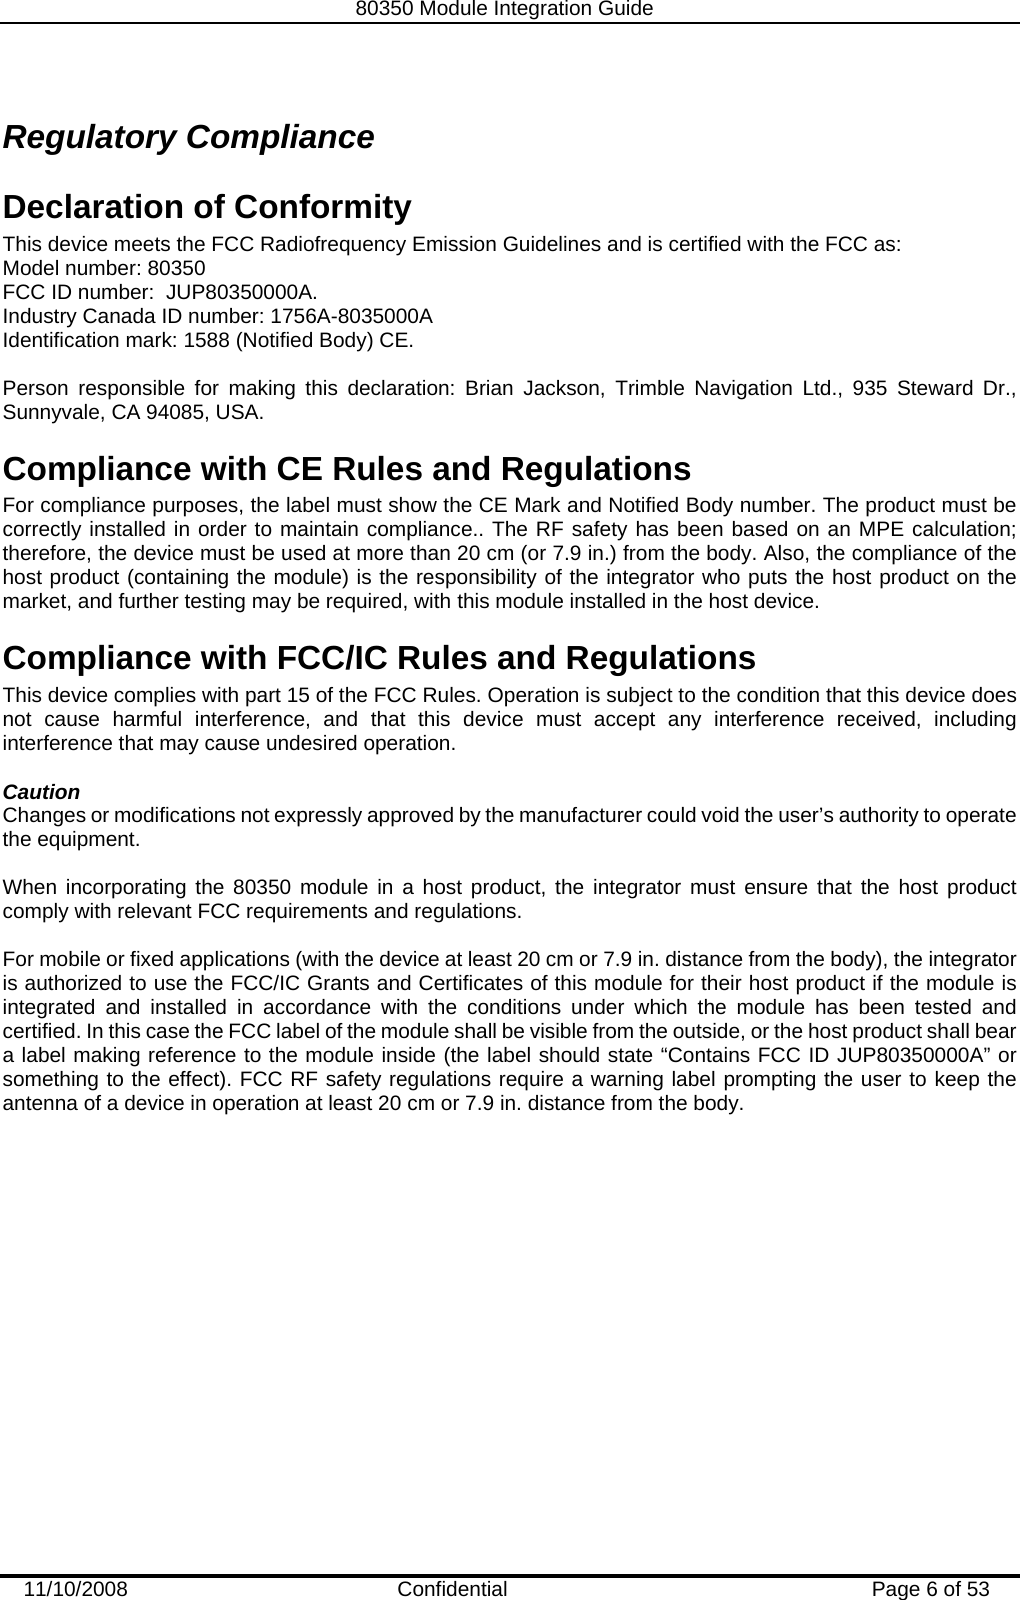   80350 Module Integration Guide  11/10/2008    Confidential  Page 6 of 53 Regulatory Compliance Declaration of Conformity This device meets the FCC Radiofrequency Emission Guidelines and is certified with the FCC as: Model number: 80350 FCC ID number:  JUP80350000A. Industry Canada ID number: 1756A-8035000A Identification mark: 1588 (Notified Body) CE.  Person responsible for making this declaration: Brian Jackson, Trimble Navigation Ltd., 935 Steward Dr., Sunnyvale, CA 94085, USA. Compliance with CE Rules and Regulations  For compliance purposes, the label must show the CE Mark and Notified Body number. The product must be correctly installed in order to maintain compliance.. The RF safety has been based on an MPE calculation; therefore, the device must be used at more than 20 cm (or 7.9 in.) from the body. Also, the compliance of the host product (containing the module) is the responsibility of the integrator who puts the host product on the market, and further testing may be required, with this module installed in the host device. Compliance with FCC/IC Rules and Regulations This device complies with part 15 of the FCC Rules. Operation is subject to the condition that this device does not cause harmful interference, and that this device must accept any interference received, including interference that may cause undesired operation.   Caution Changes or modifications not expressly approved by the manufacturer could void the user’s authority to operate the equipment.  When incorporating the 80350 module in a host product, the integrator must ensure that the host product comply with relevant FCC requirements and regulations.   For mobile or fixed applications (with the device at least 20 cm or 7.9 in. distance from the body), the integrator is authorized to use the FCC/IC Grants and Certificates of this module for their host product if the module is integrated and installed in accordance with the conditions under which the module has been tested and certified. In this case the FCC label of the module shall be visible from the outside, or the host product shall bear a label making reference to the module inside (the label should state “Contains FCC ID JUP80350000A” or something to the effect). FCC RF safety regulations require a warning label prompting the user to keep the antenna of a device in operation at least 20 cm or 7.9 in. distance from the body. 